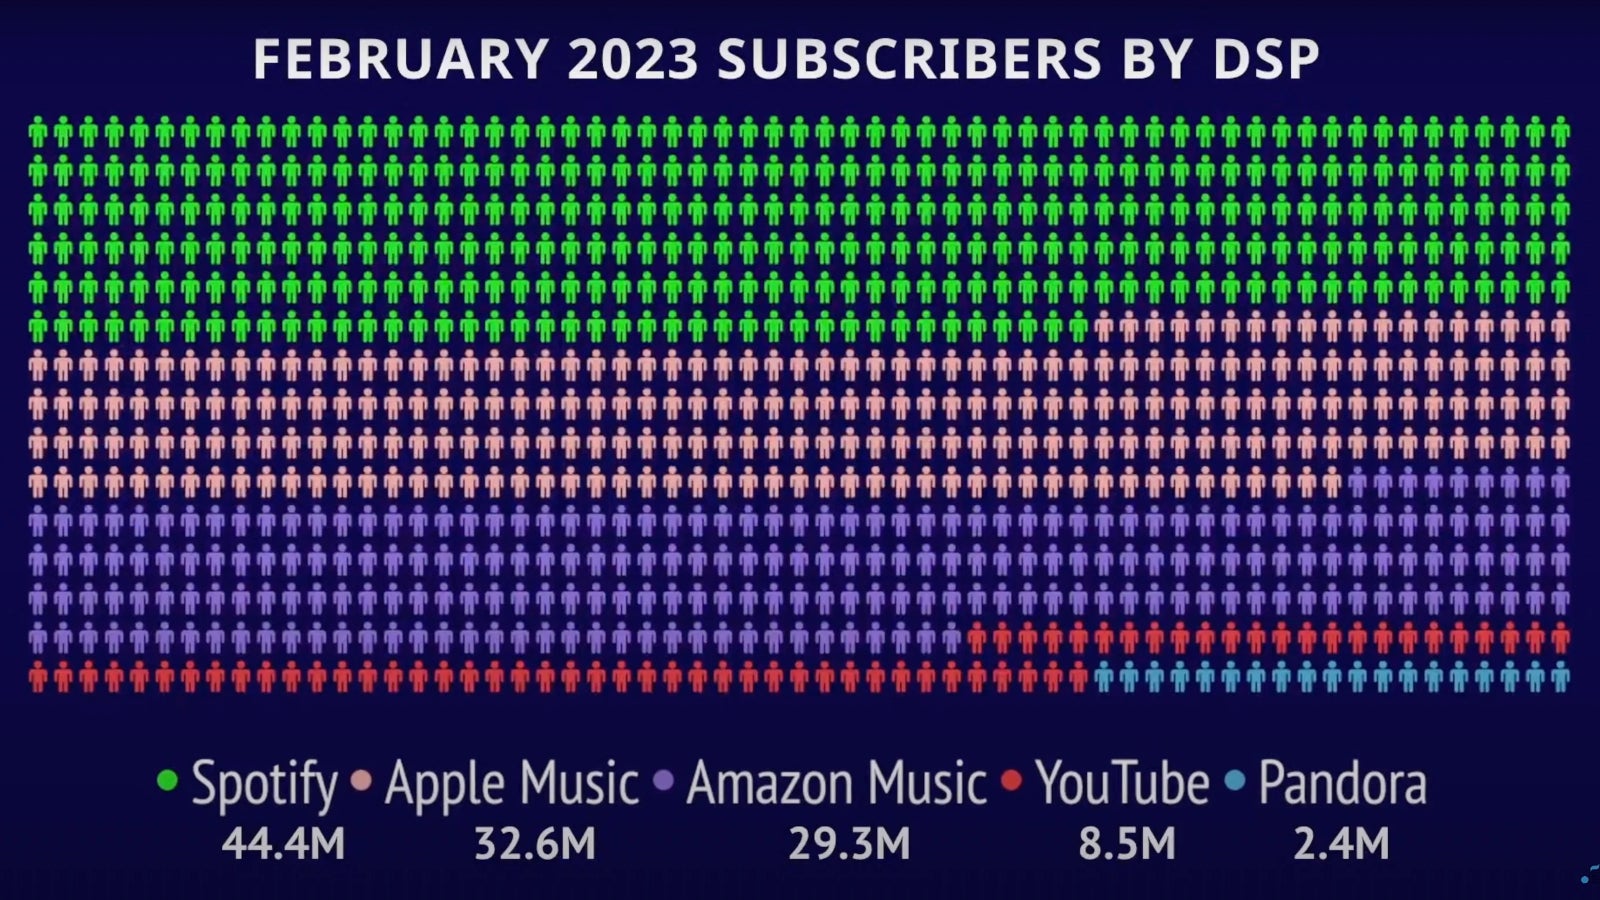 February 2023 music streaming services rankings - Apple Music is the second biggest subscription music service in the US, Spotify still in the lead